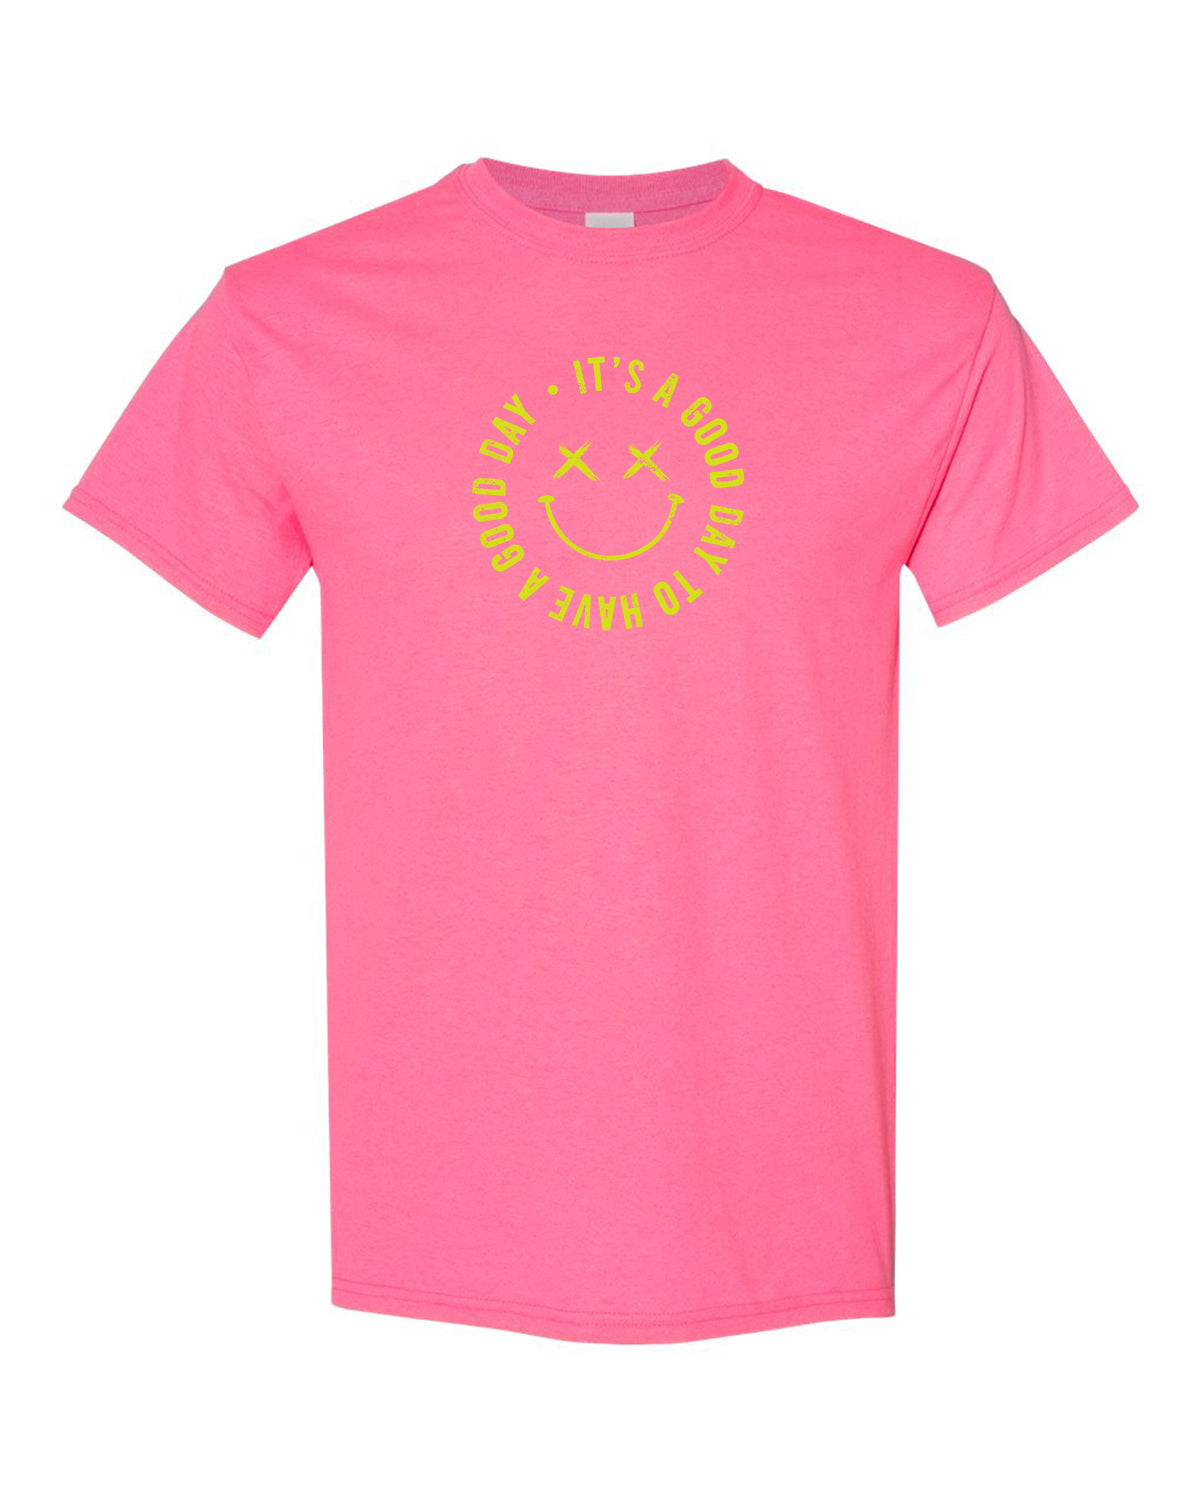 It's A Good Day Tee [neon pink/yellow]